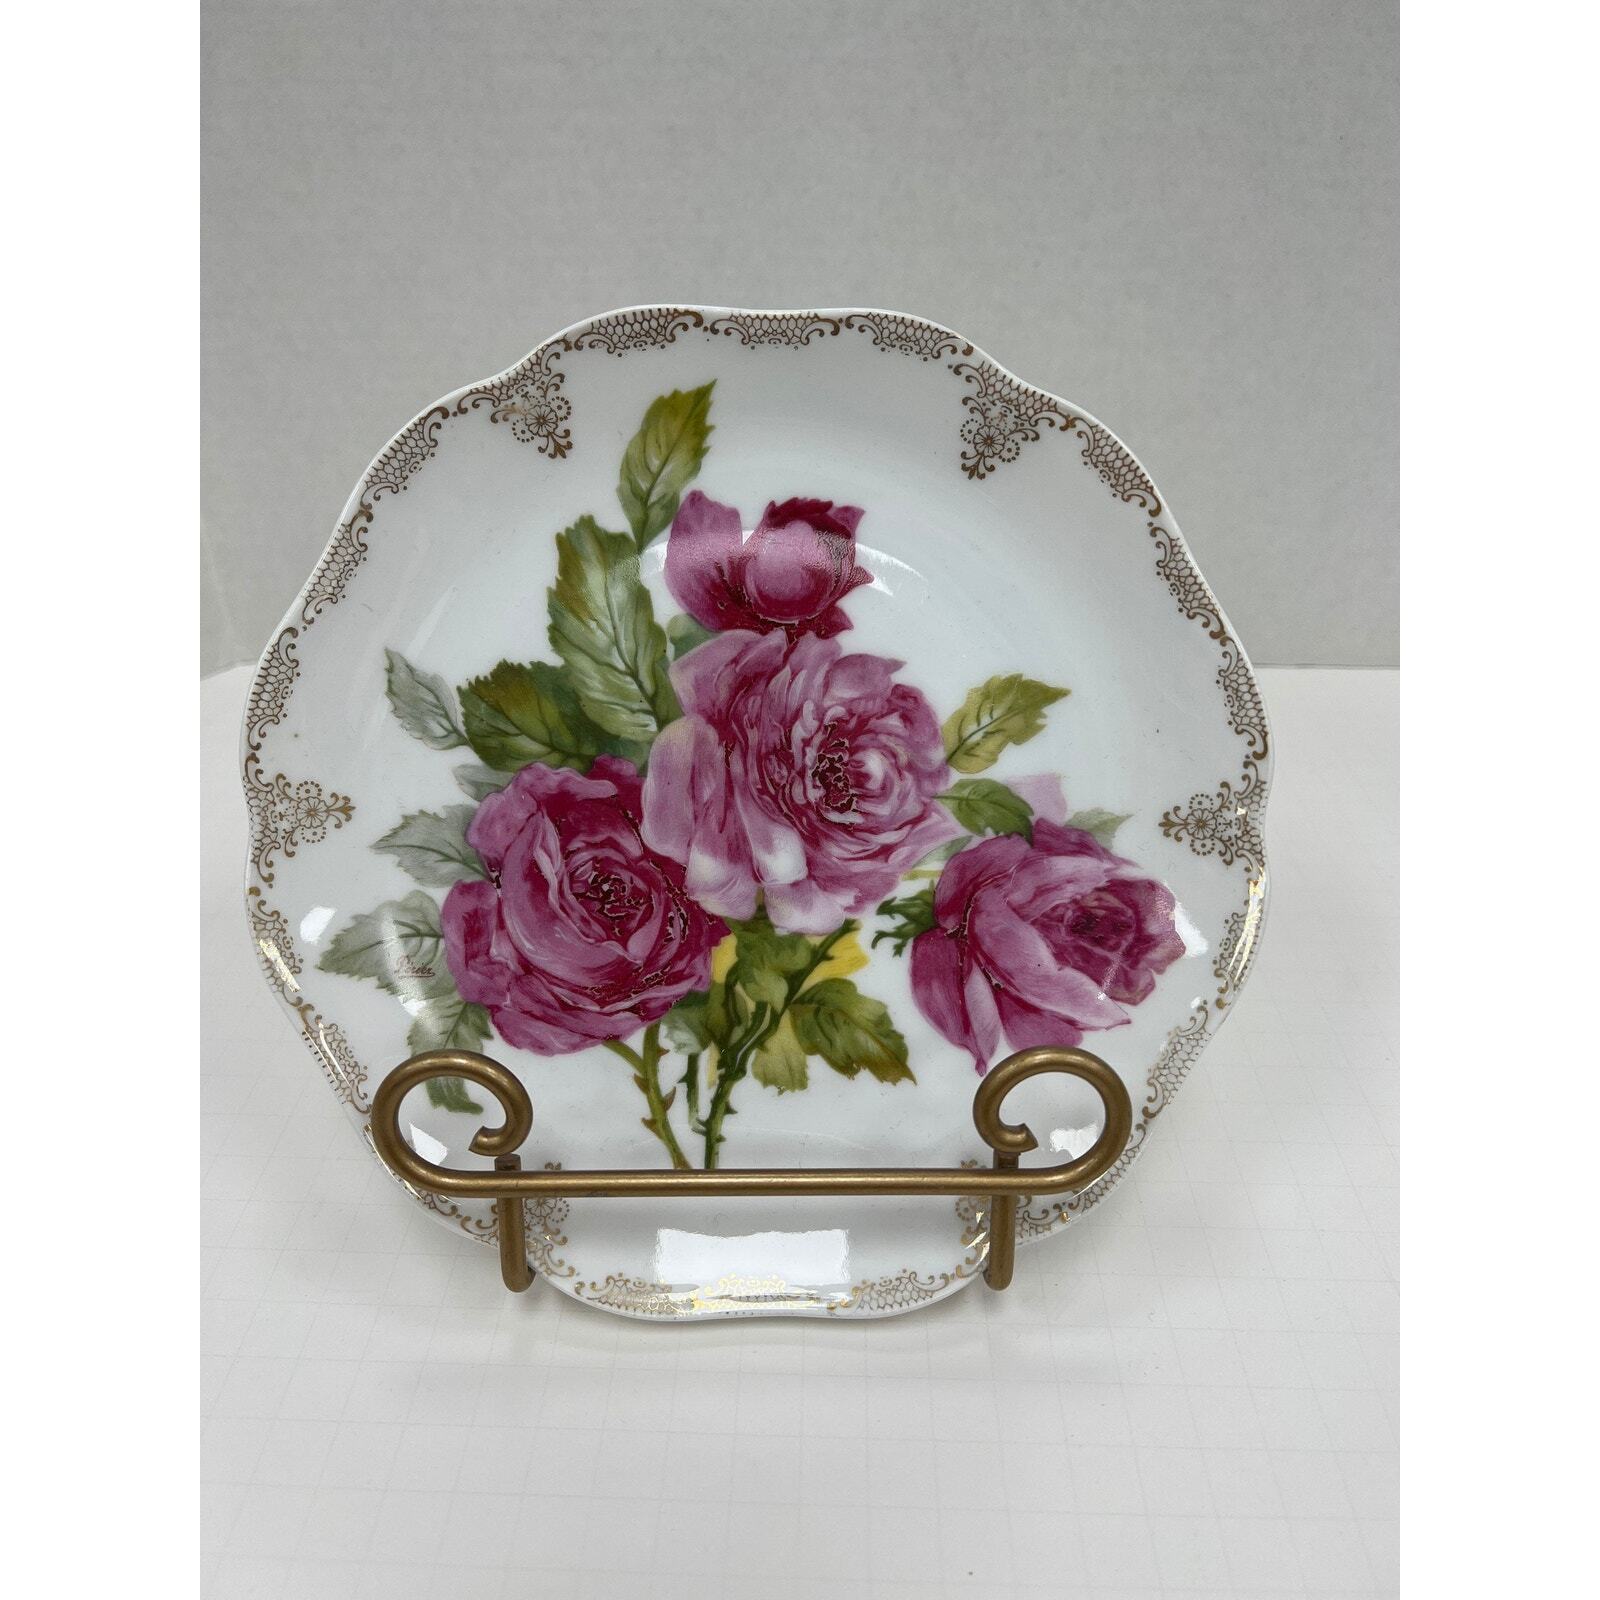 Madeleine Bavaria Rose and gold salad plate 8 inches. Stunning